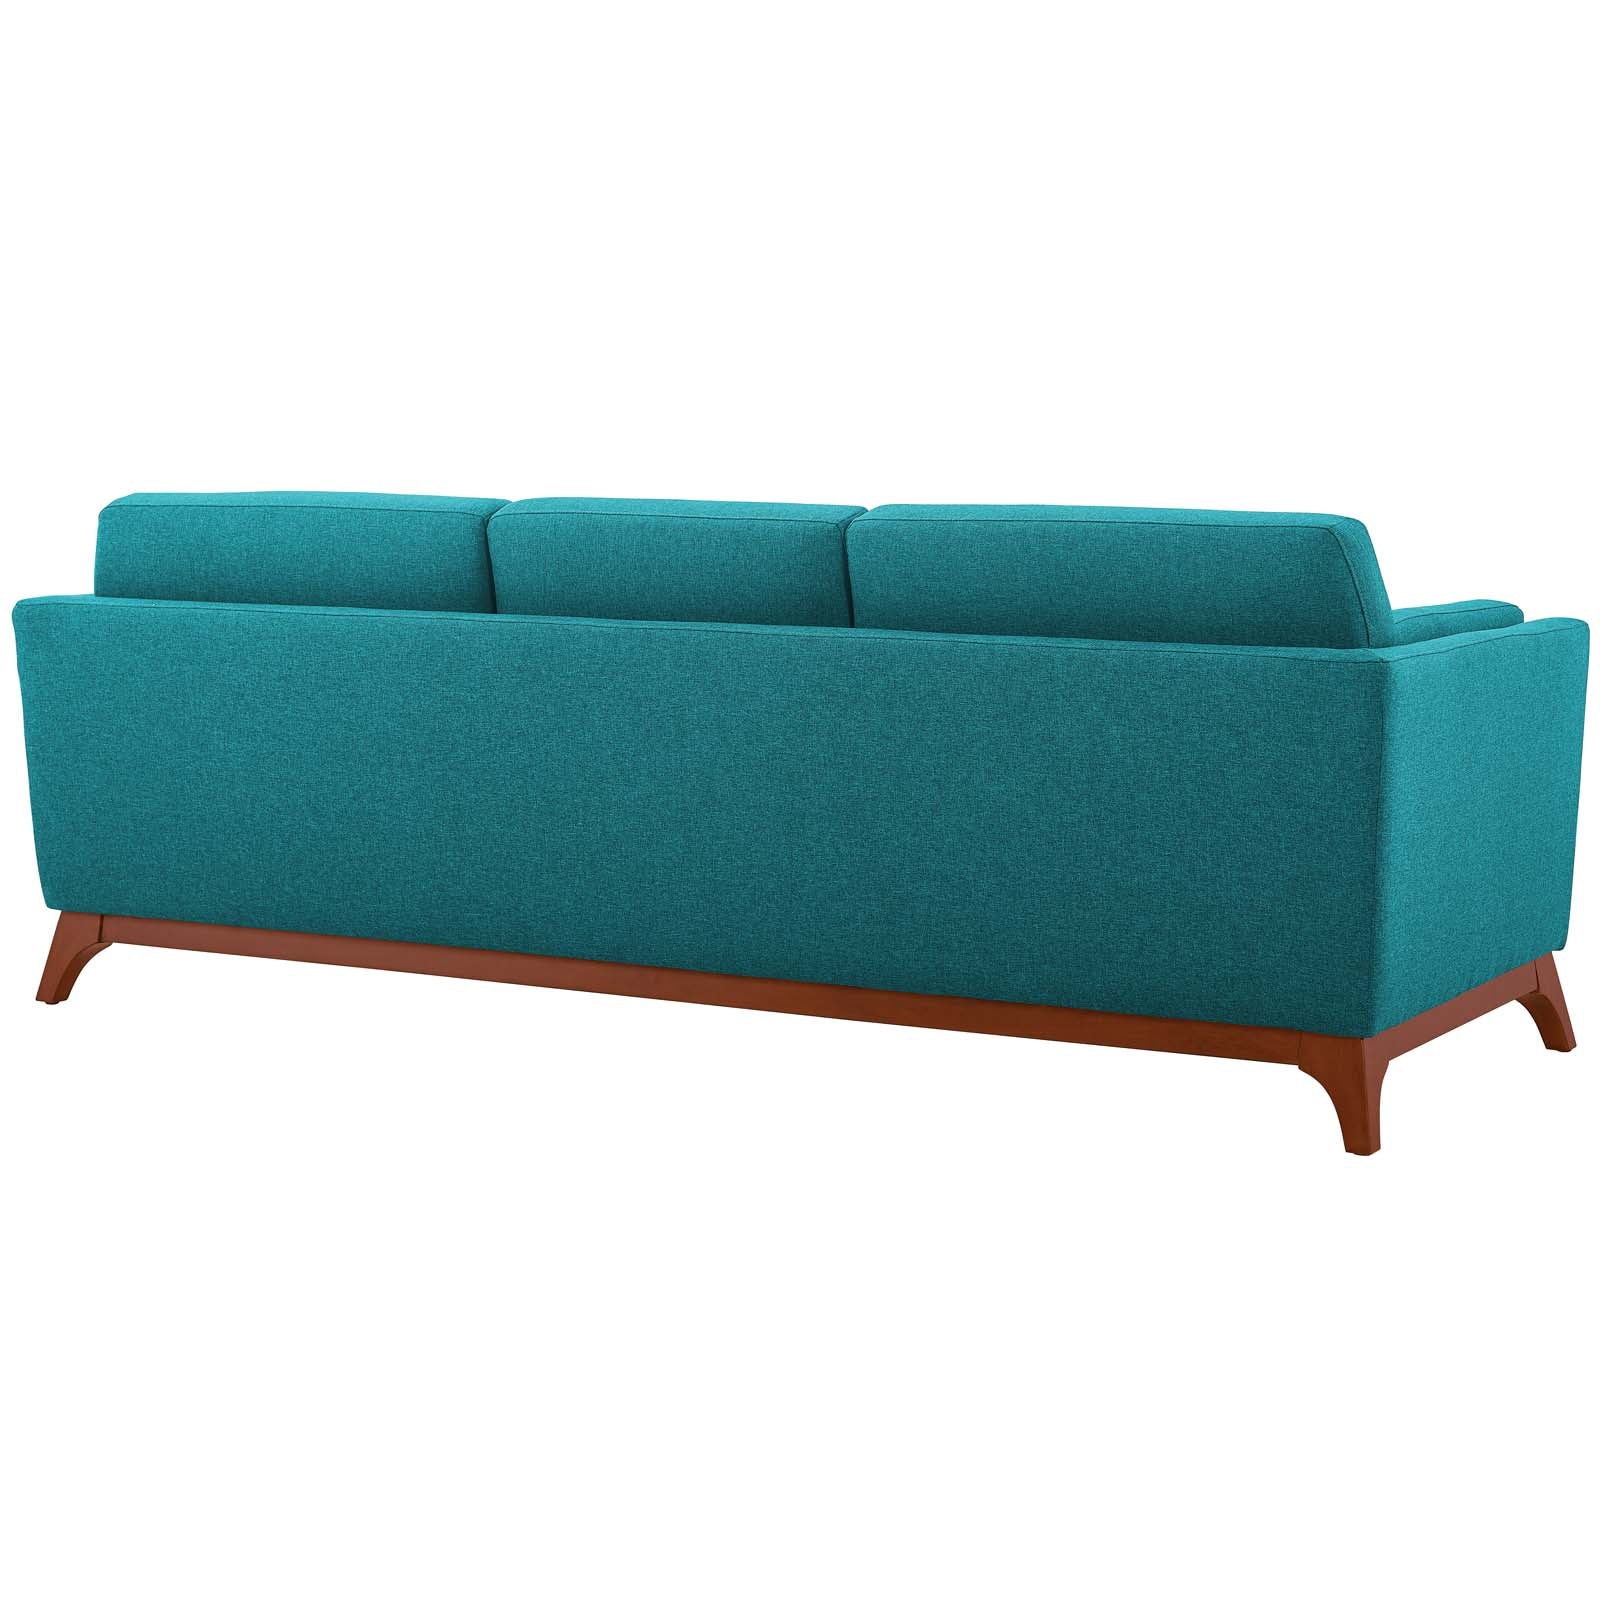 Modway Sofas & Couches - Chance Upholstered Fabric Sofa Teal